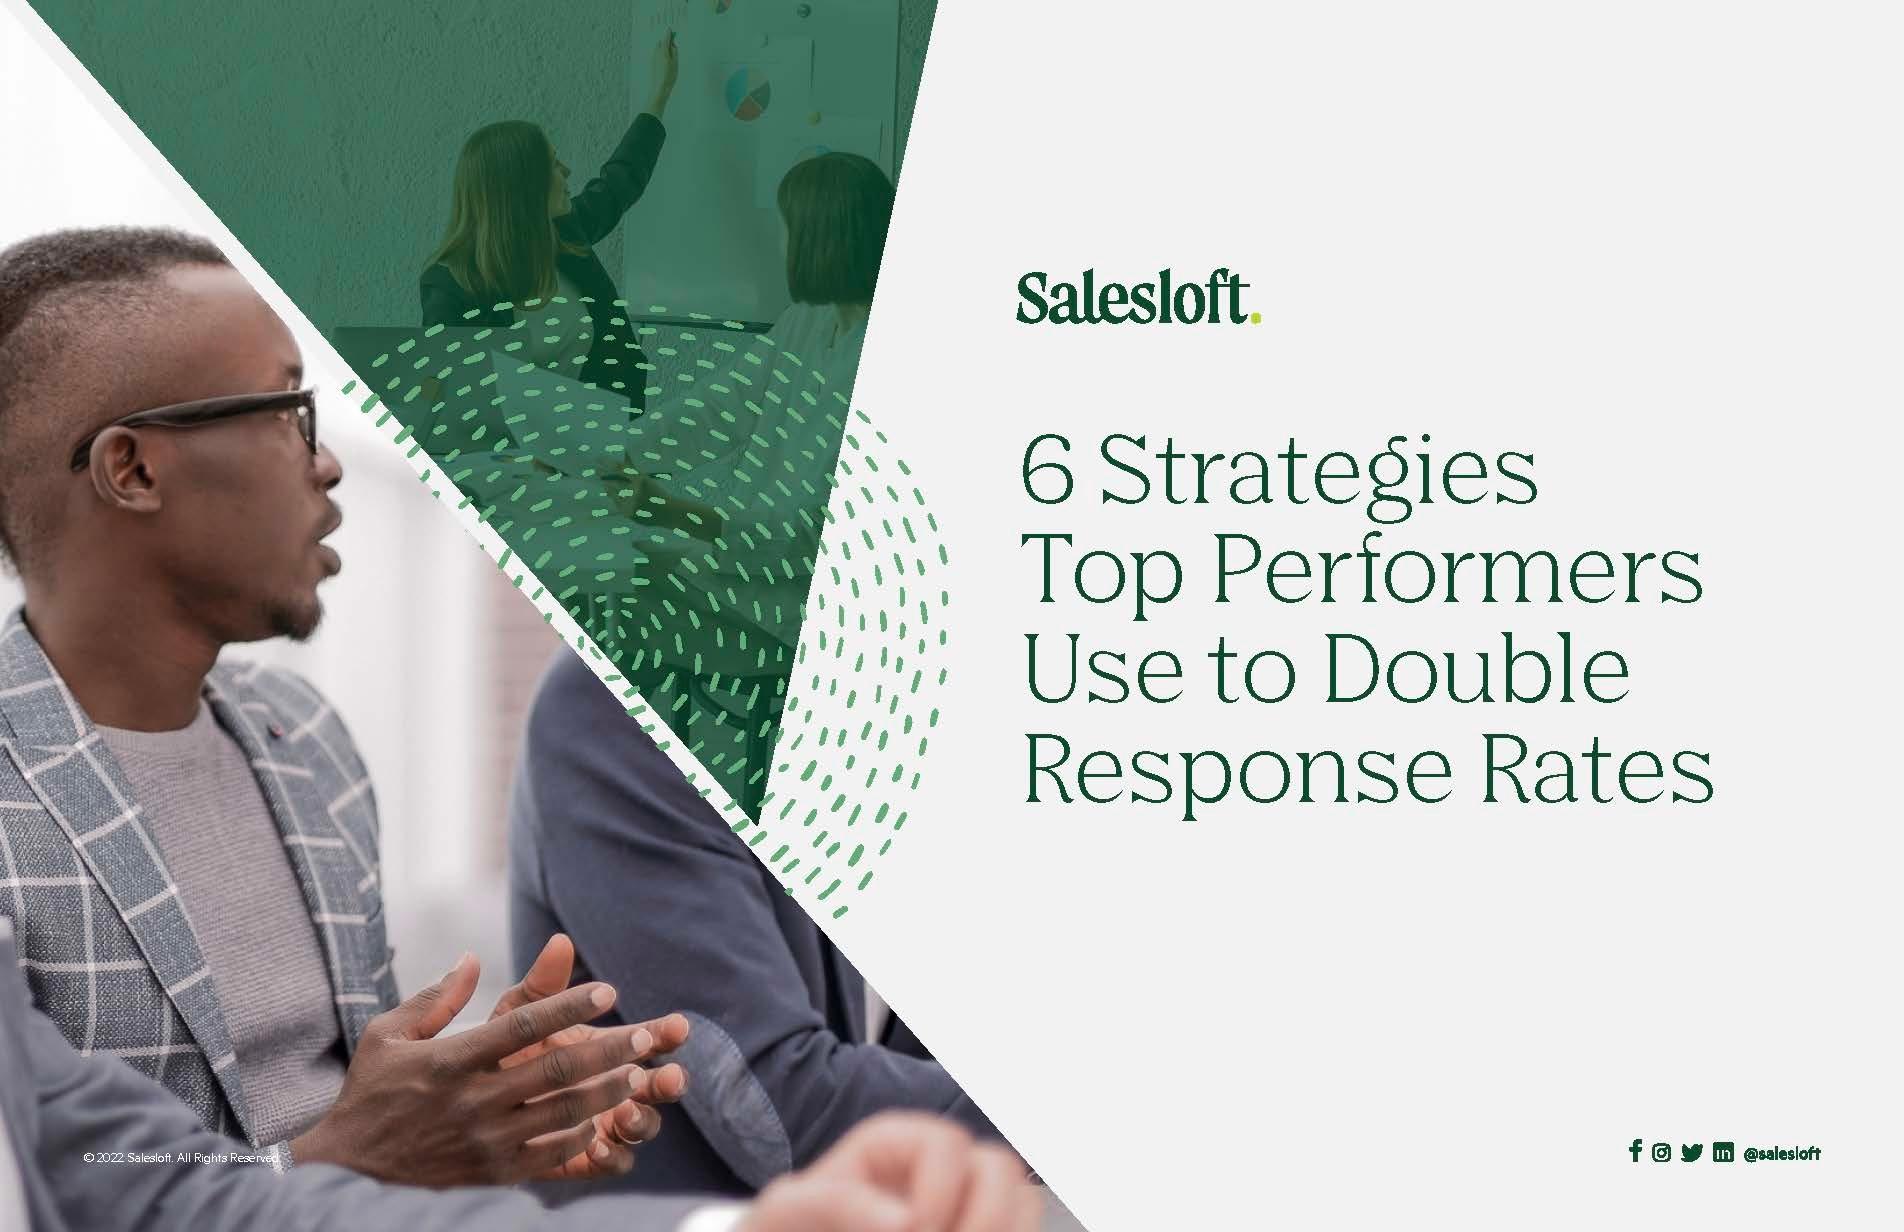 "6 strategies top performers use to double response rates"